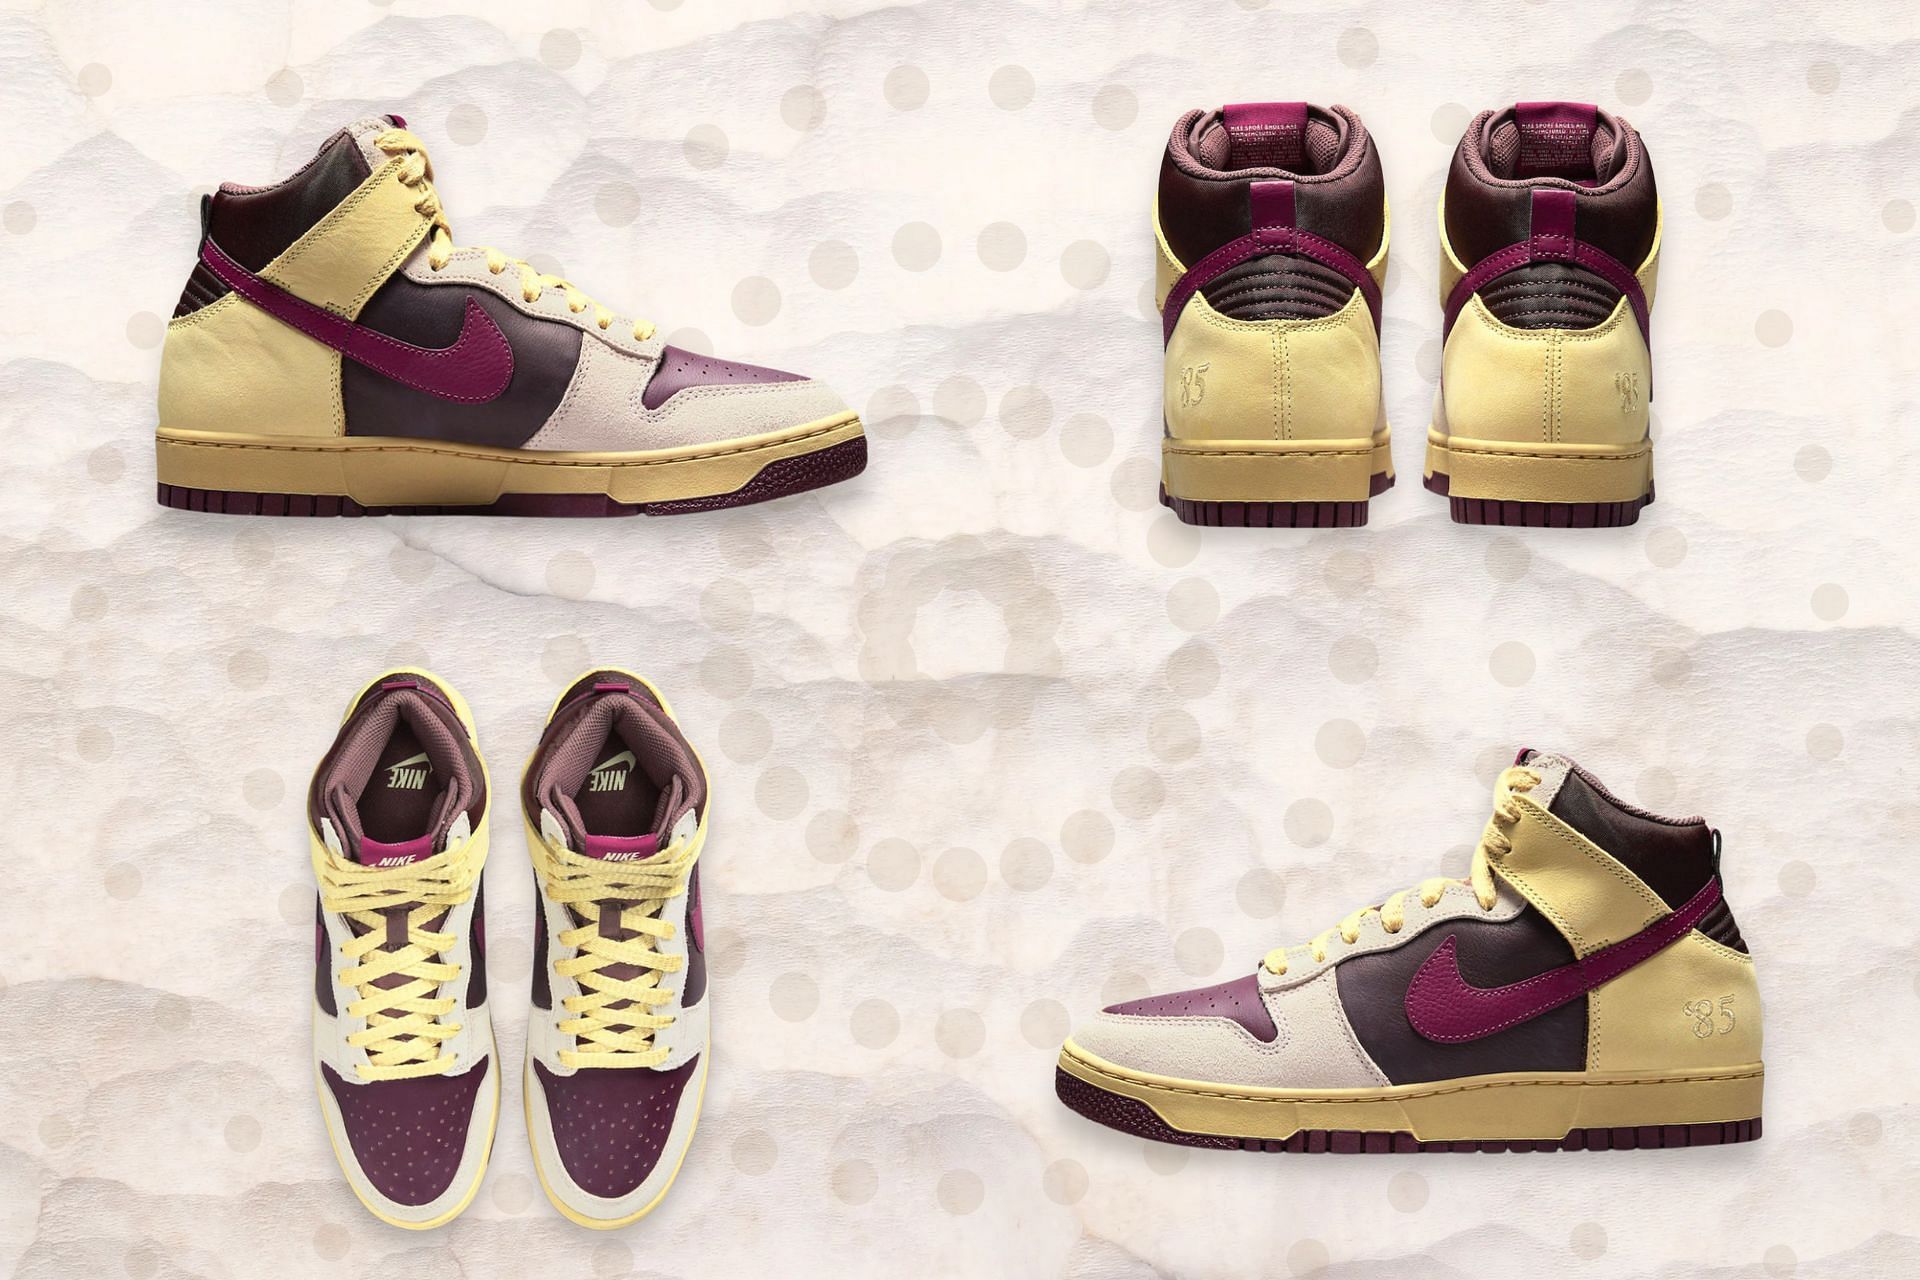 Upcoming Nike Dunk High Valentine&#039;s Day 1985 silhouette clad in Alabaster and Rosewood color (Image via Sportskeeda)